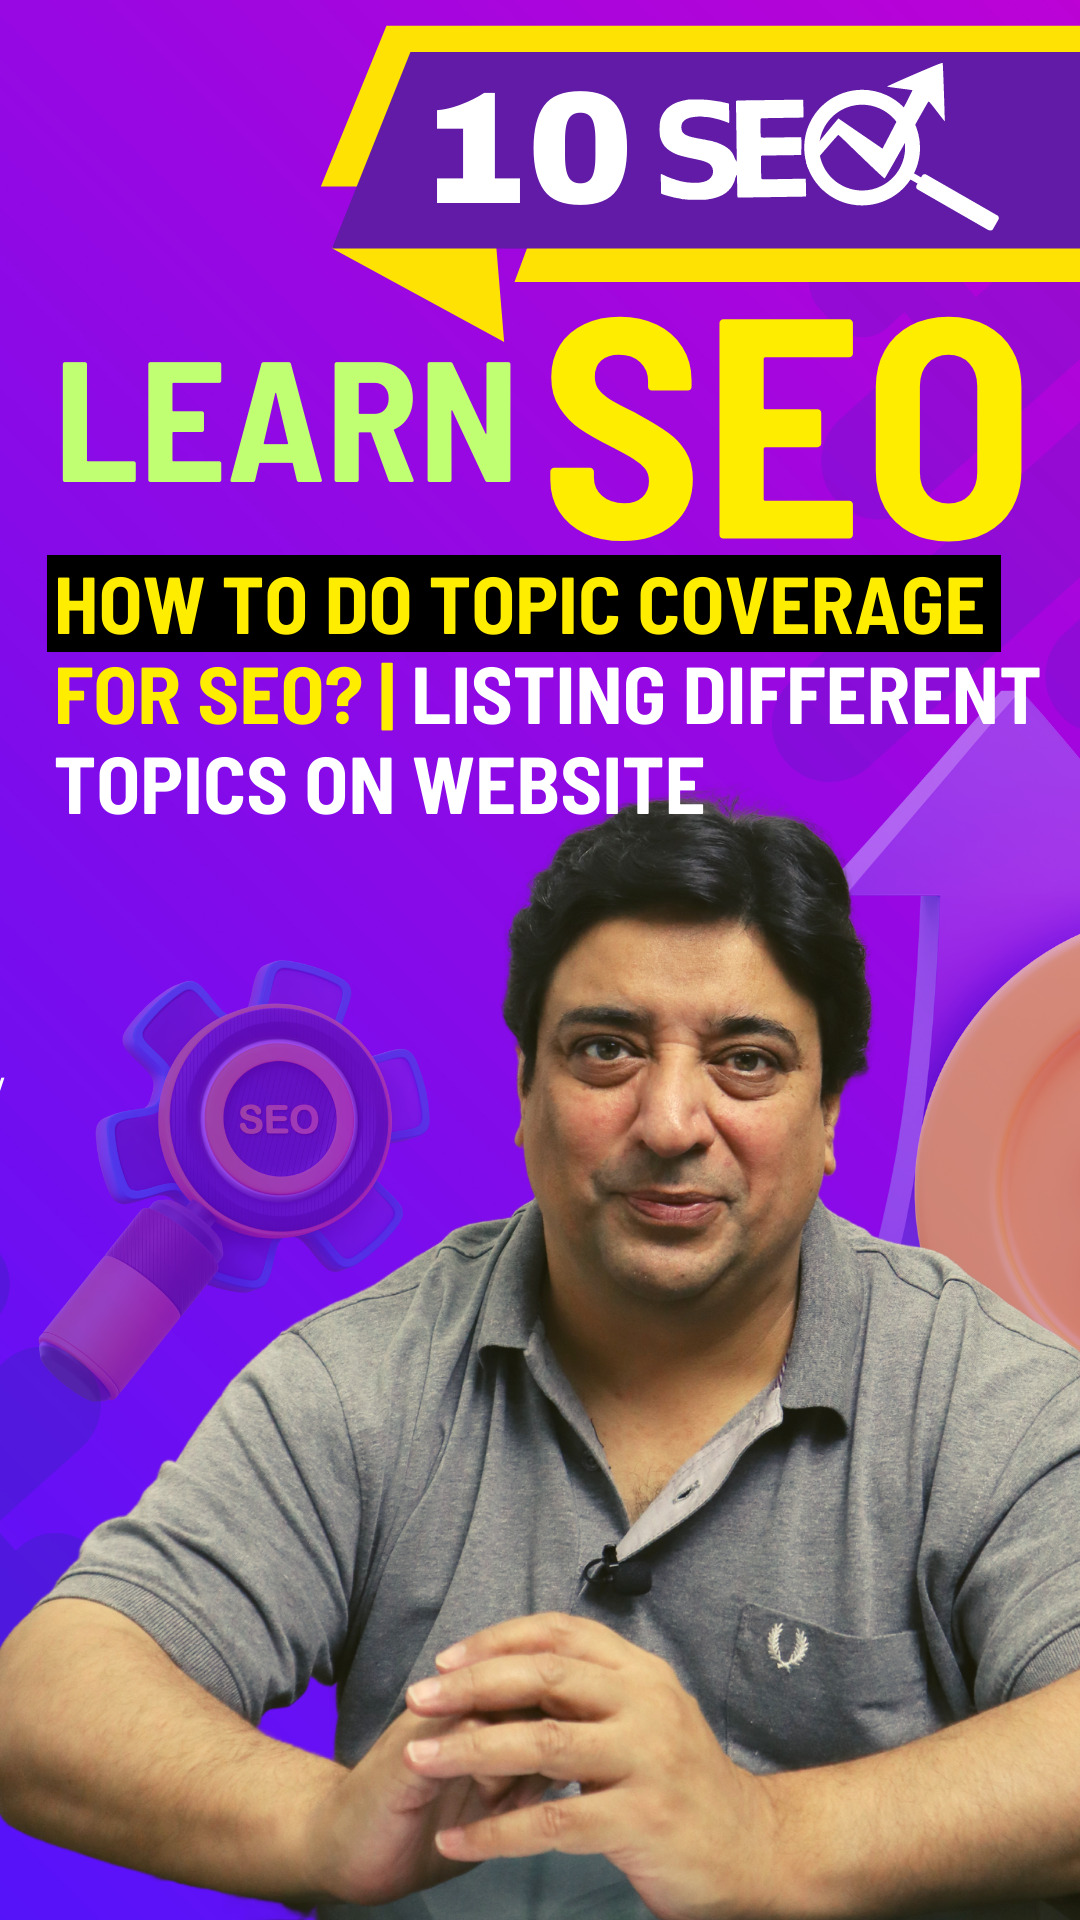 How to Do Topic Coverage For SEO Listing different topics on website